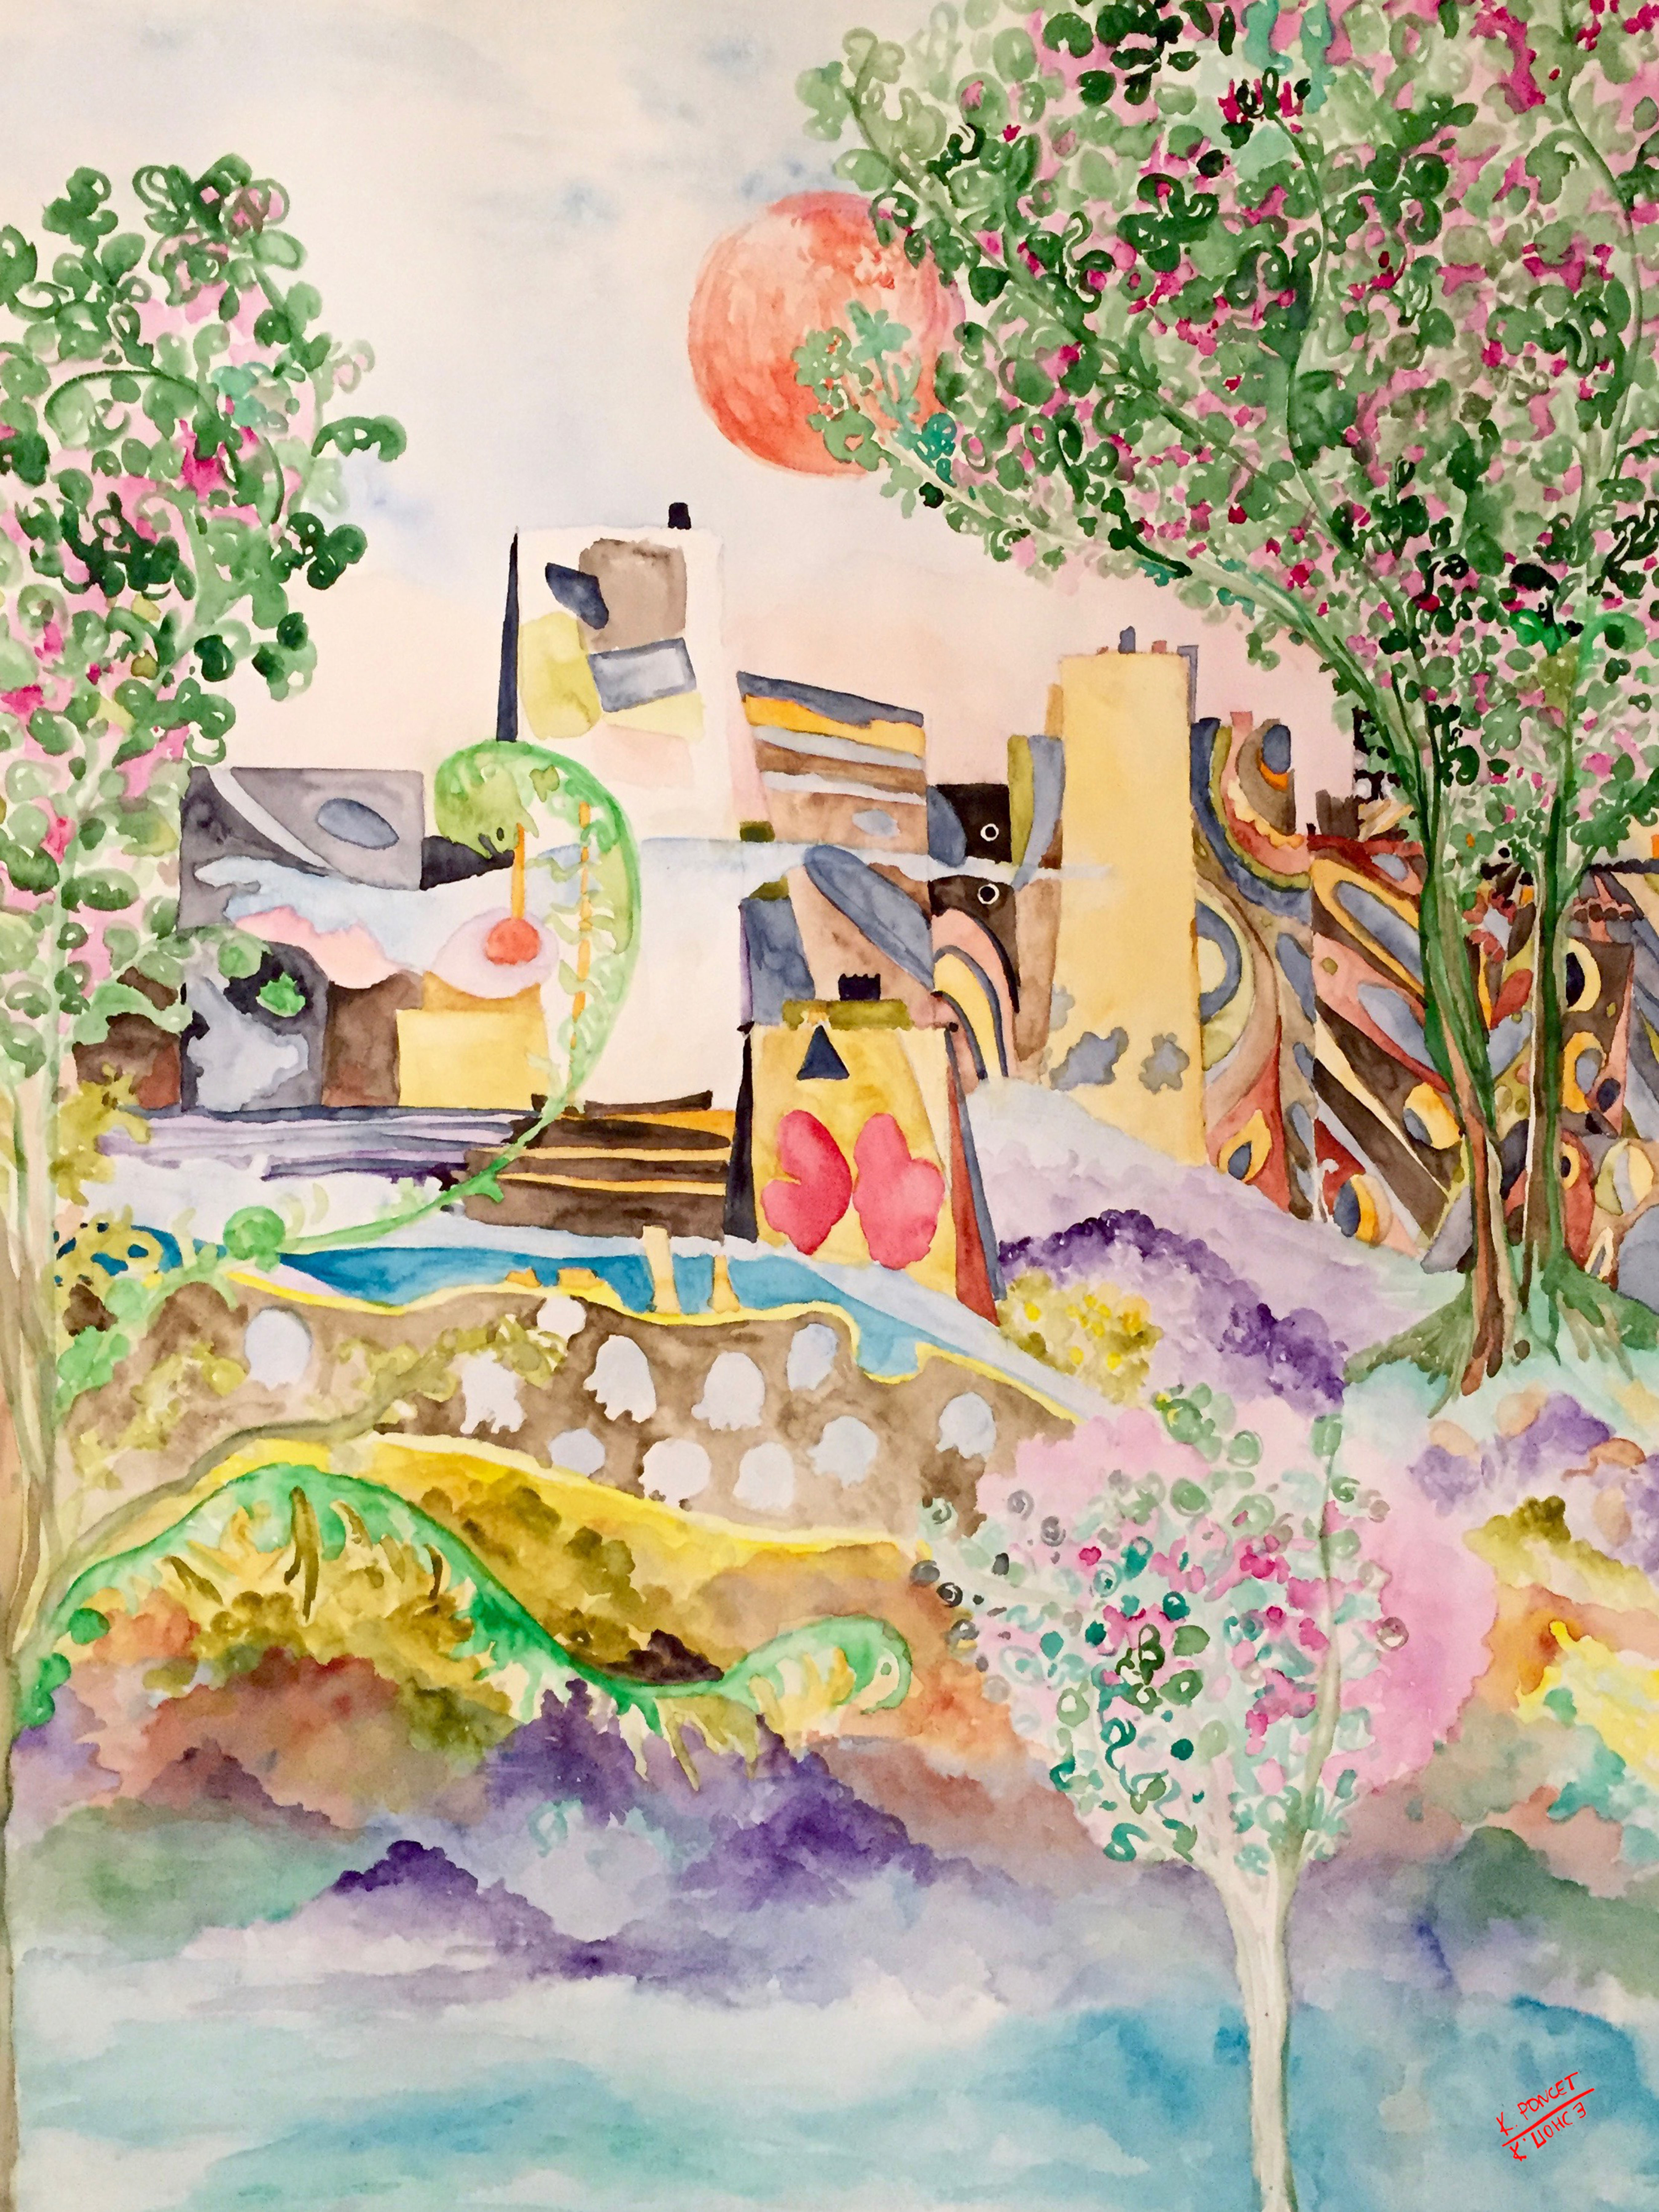 Surrealistic watercolour painting of Central Park in spring